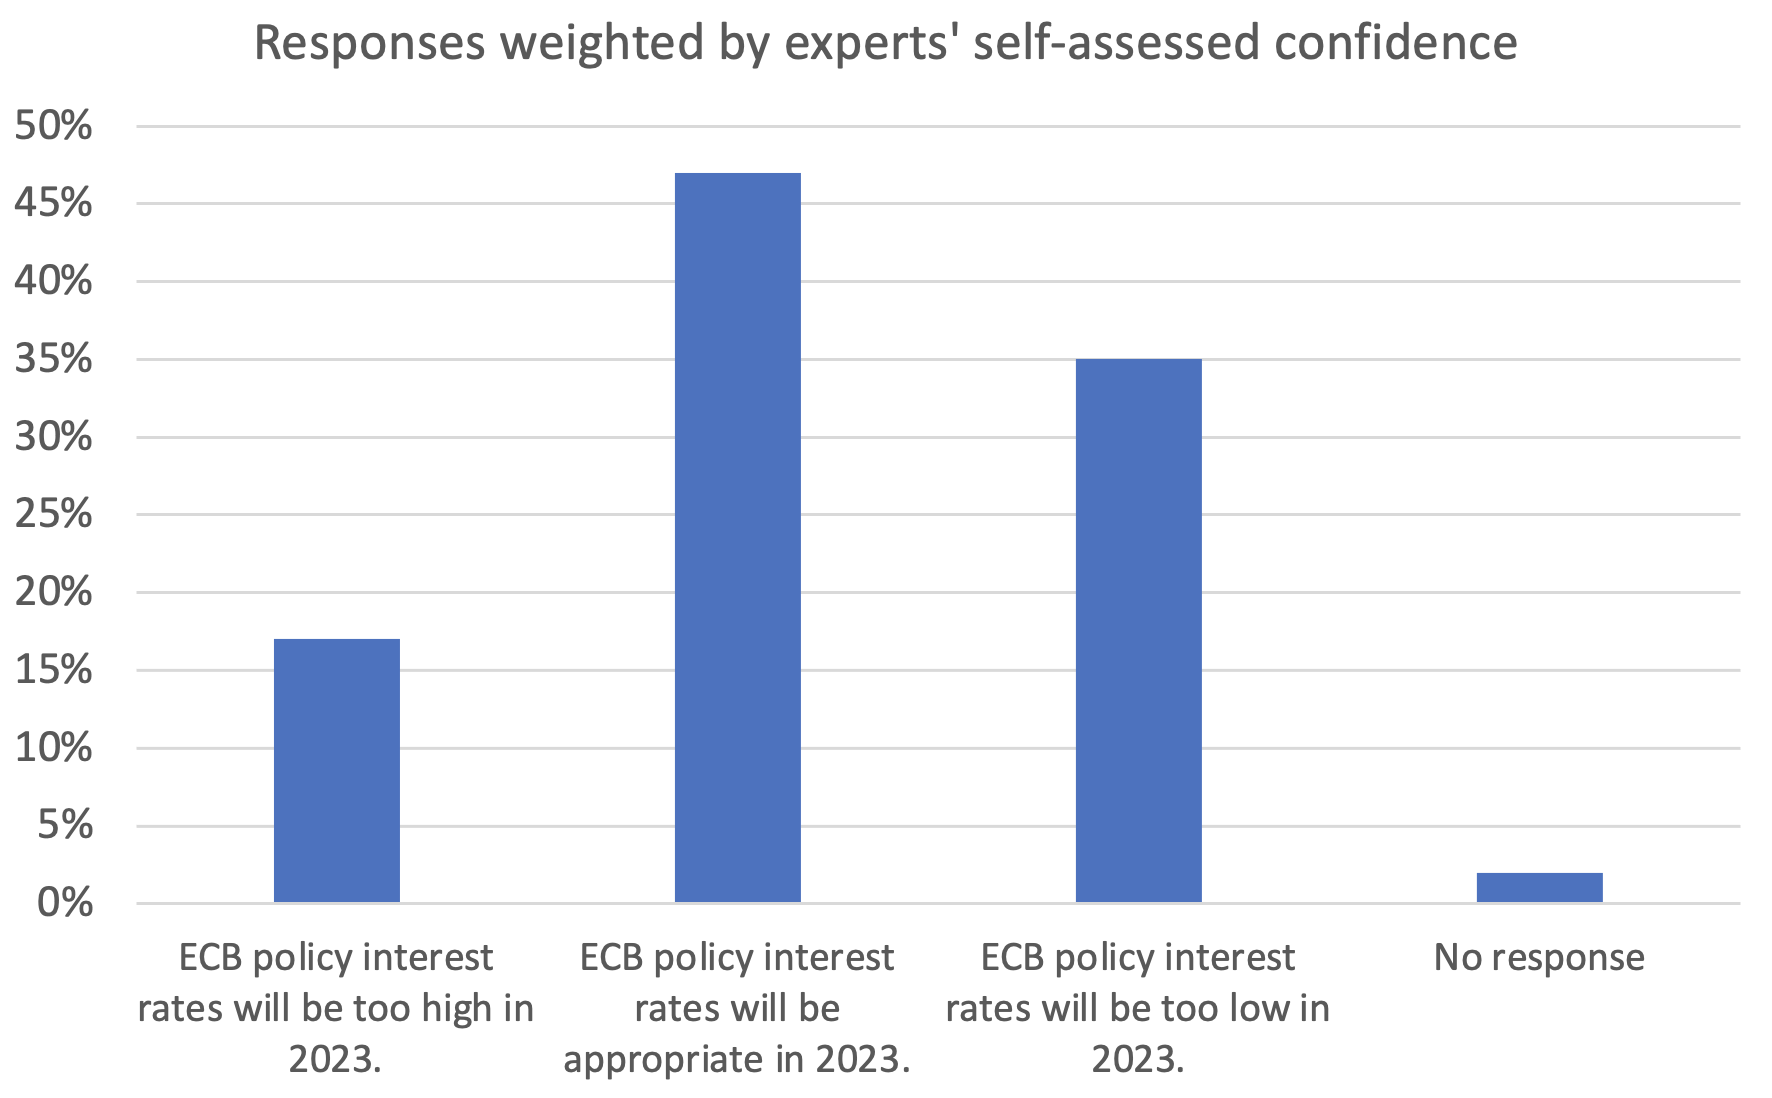 Question 3 Responses weighted by experts' self-assessed confidence